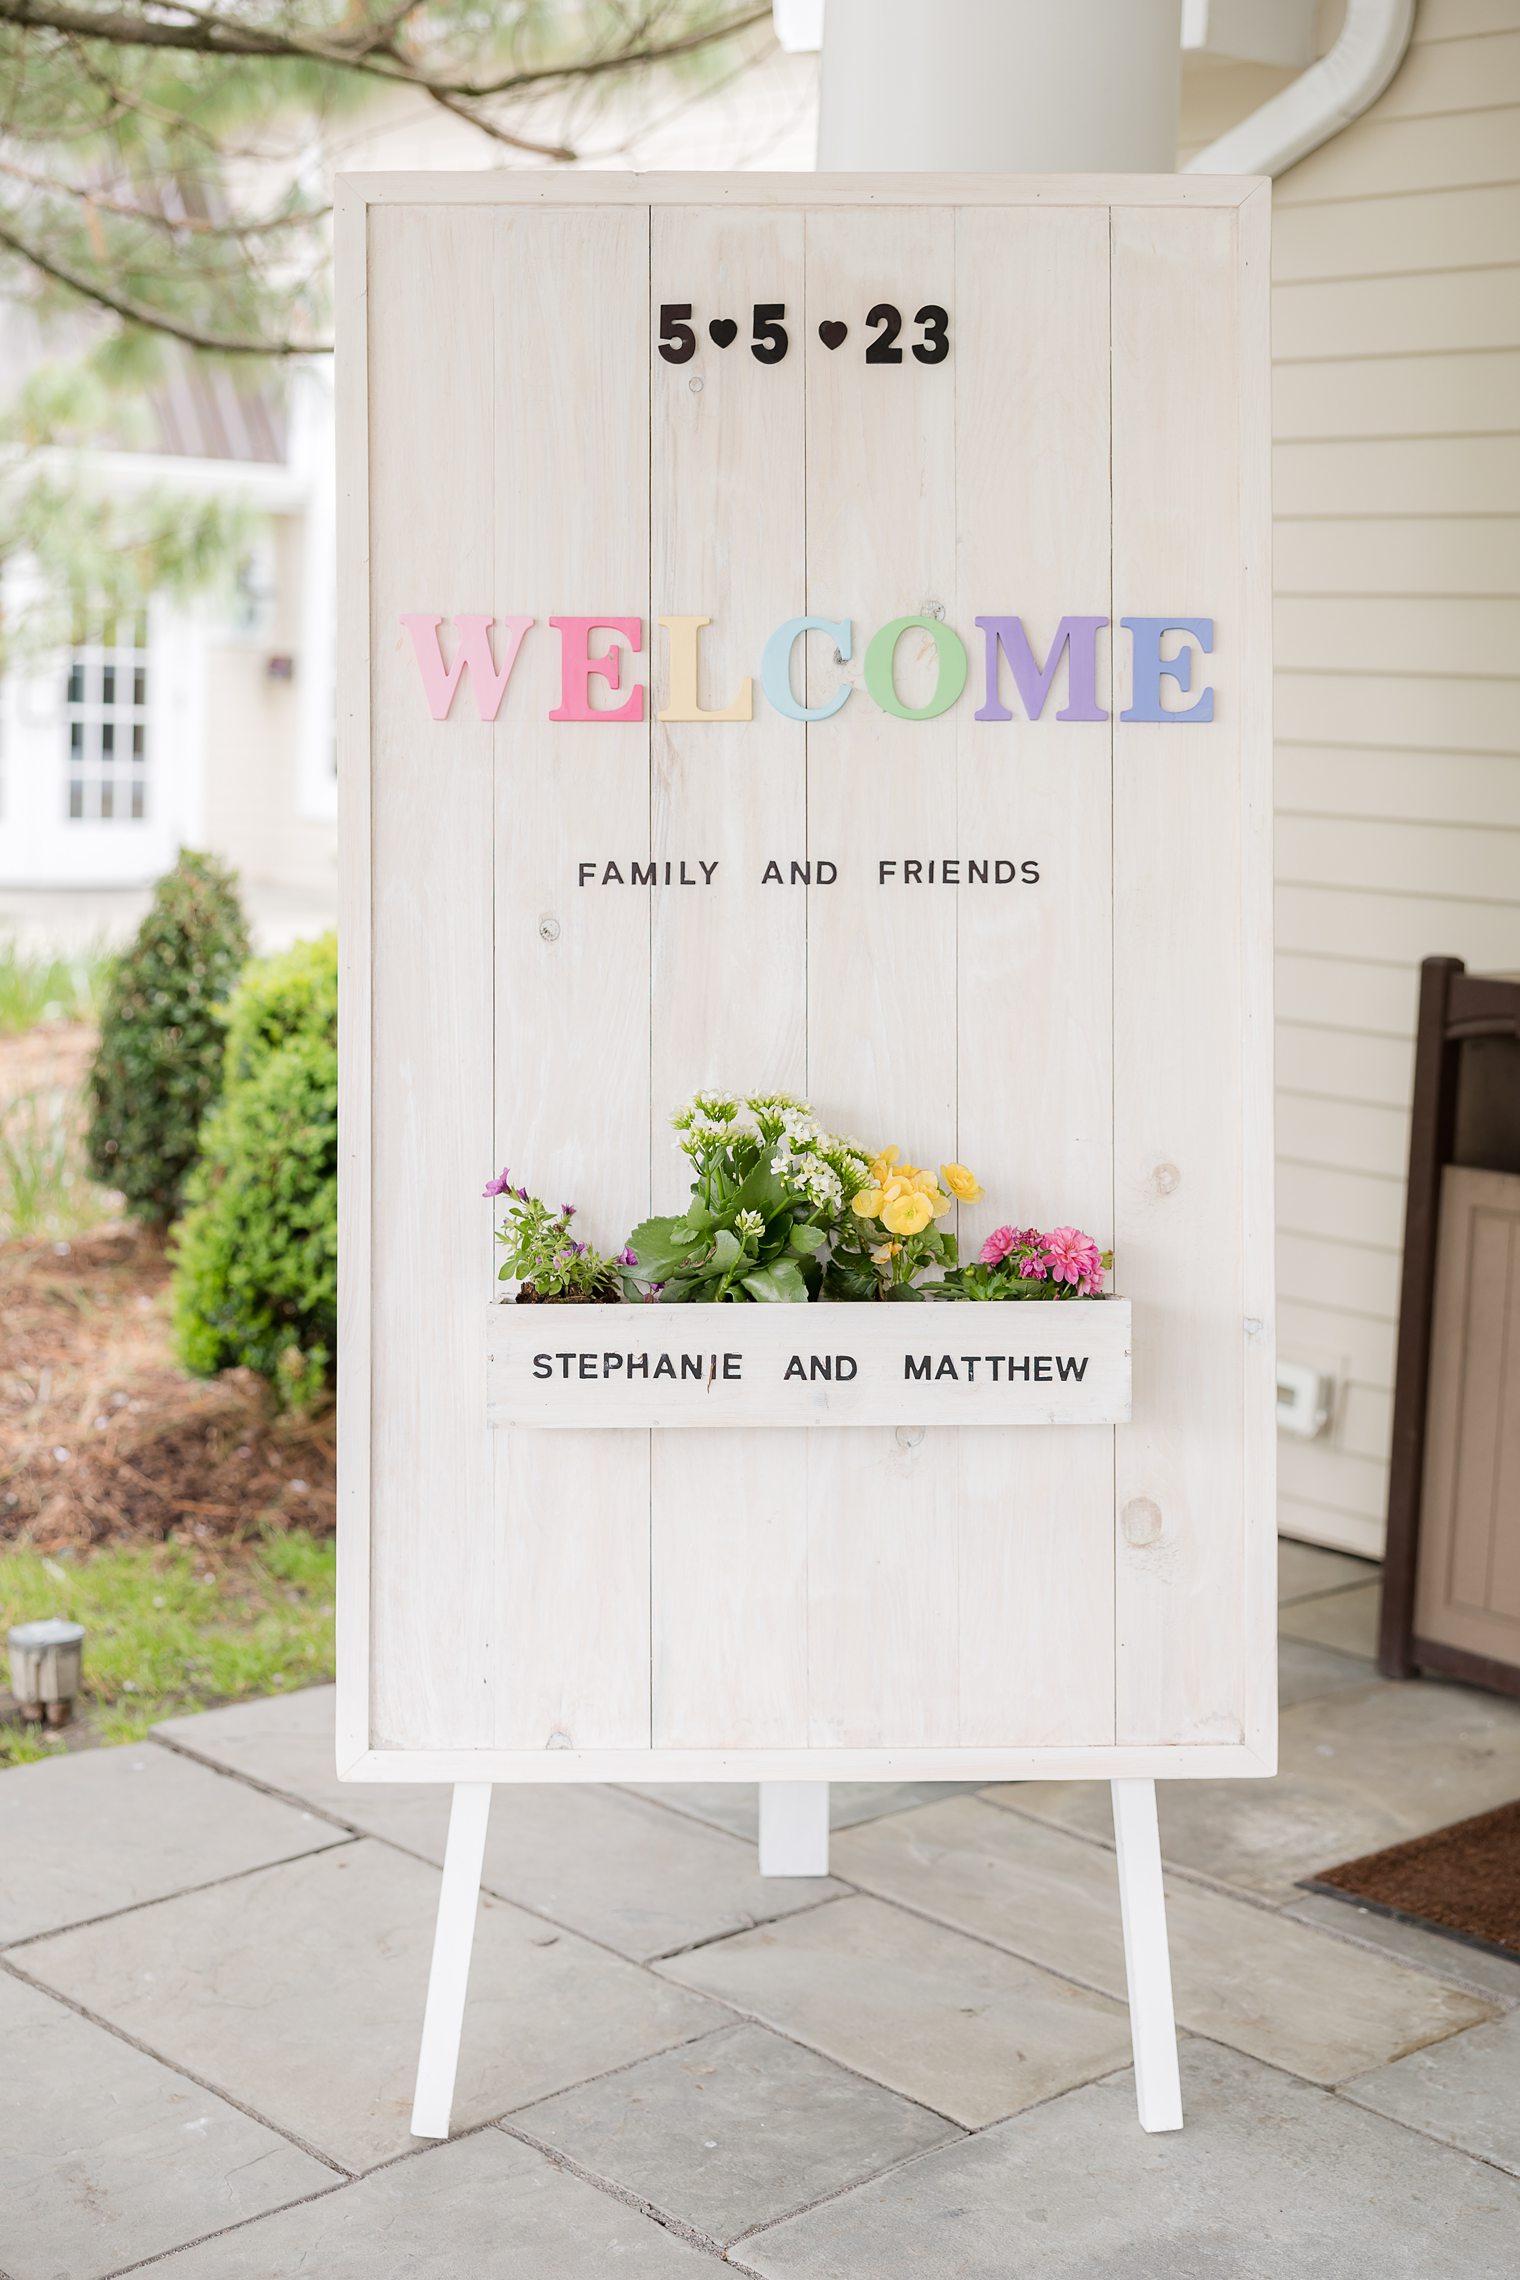 Welcome sign for wedding details